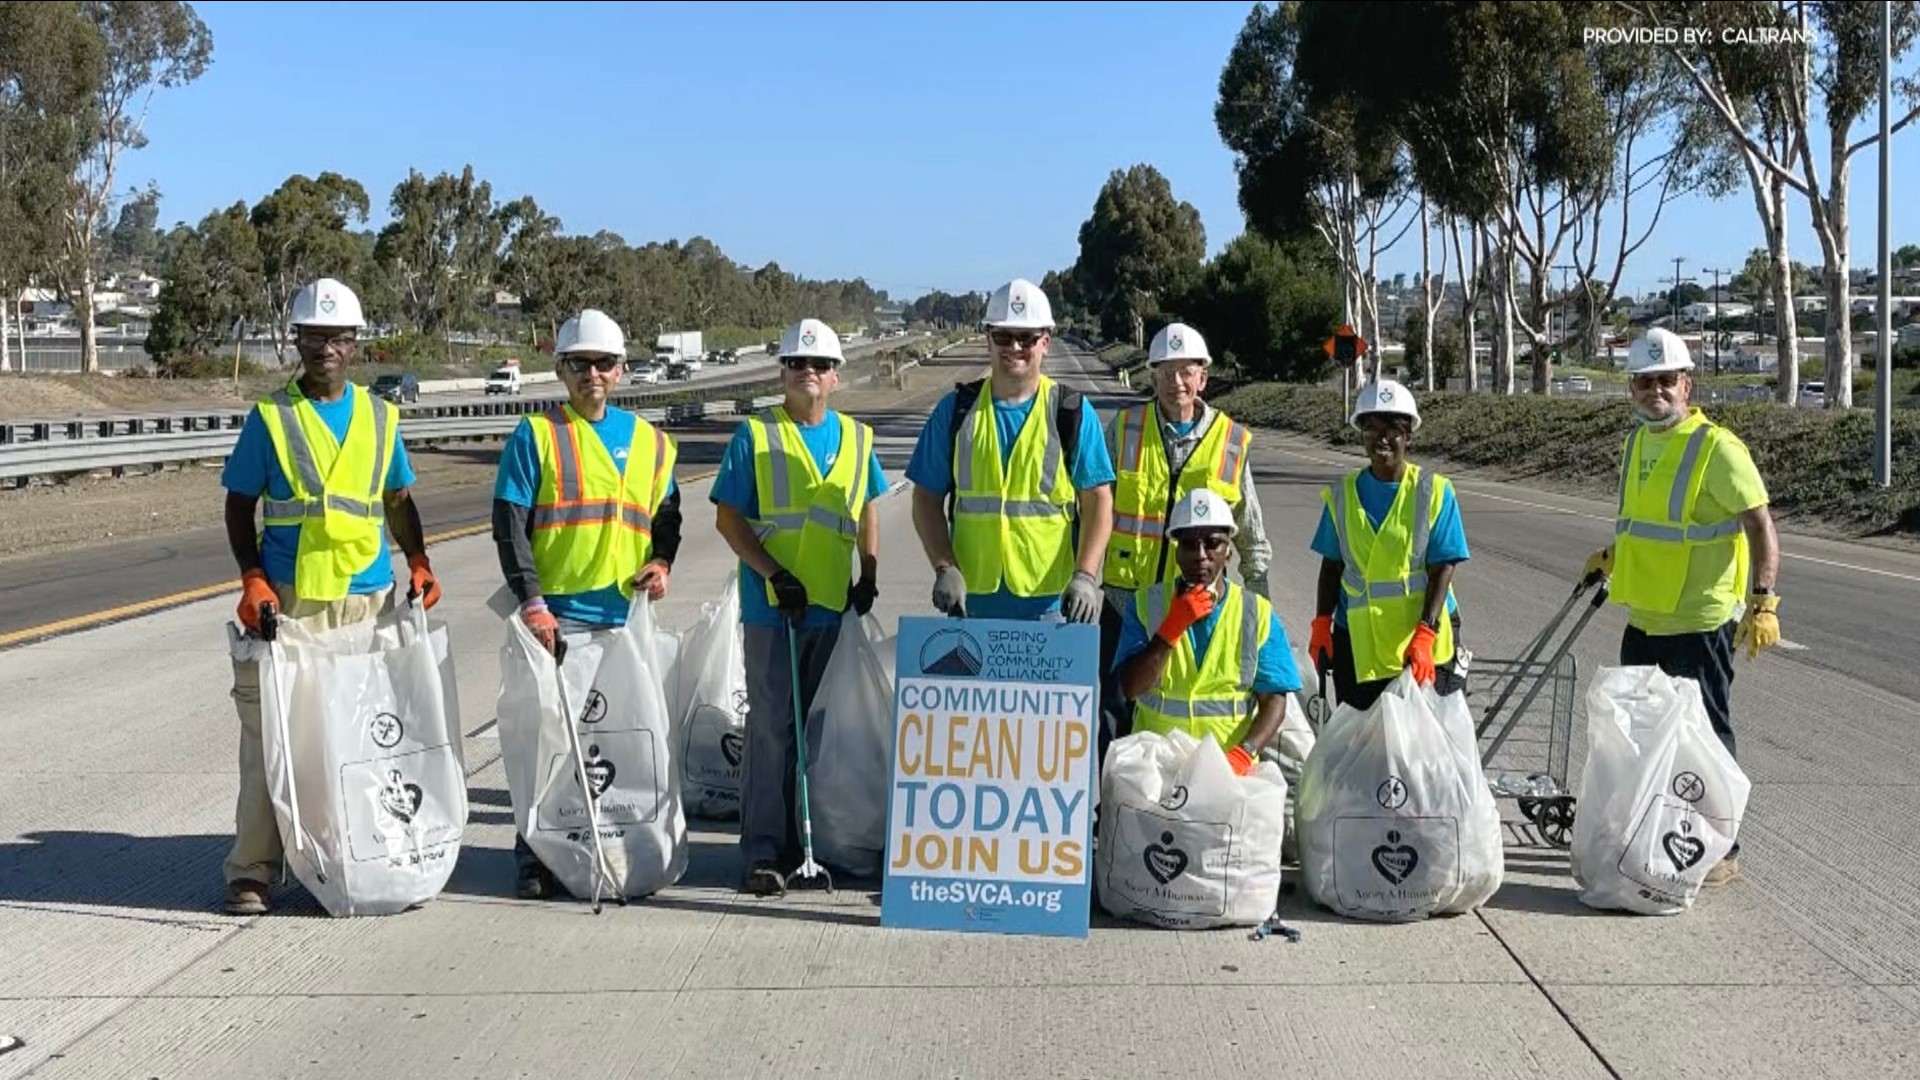 A group of volunteers in Lemon Grove is making a difference in their community one piece of litter at a time.